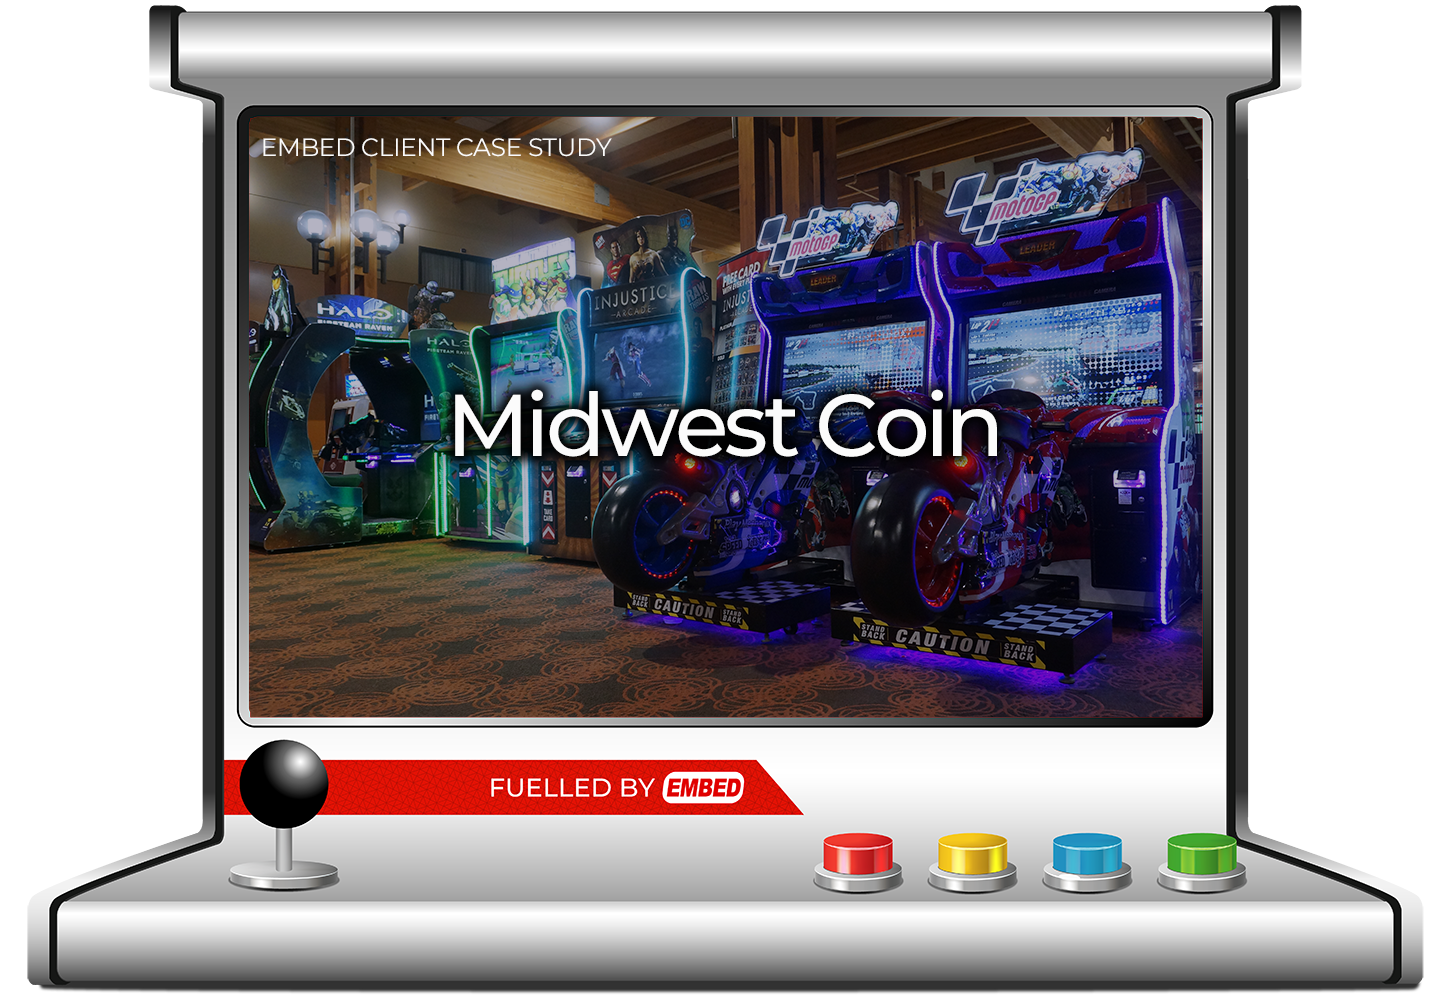 em-img-casestudy-midwestcoin-float1